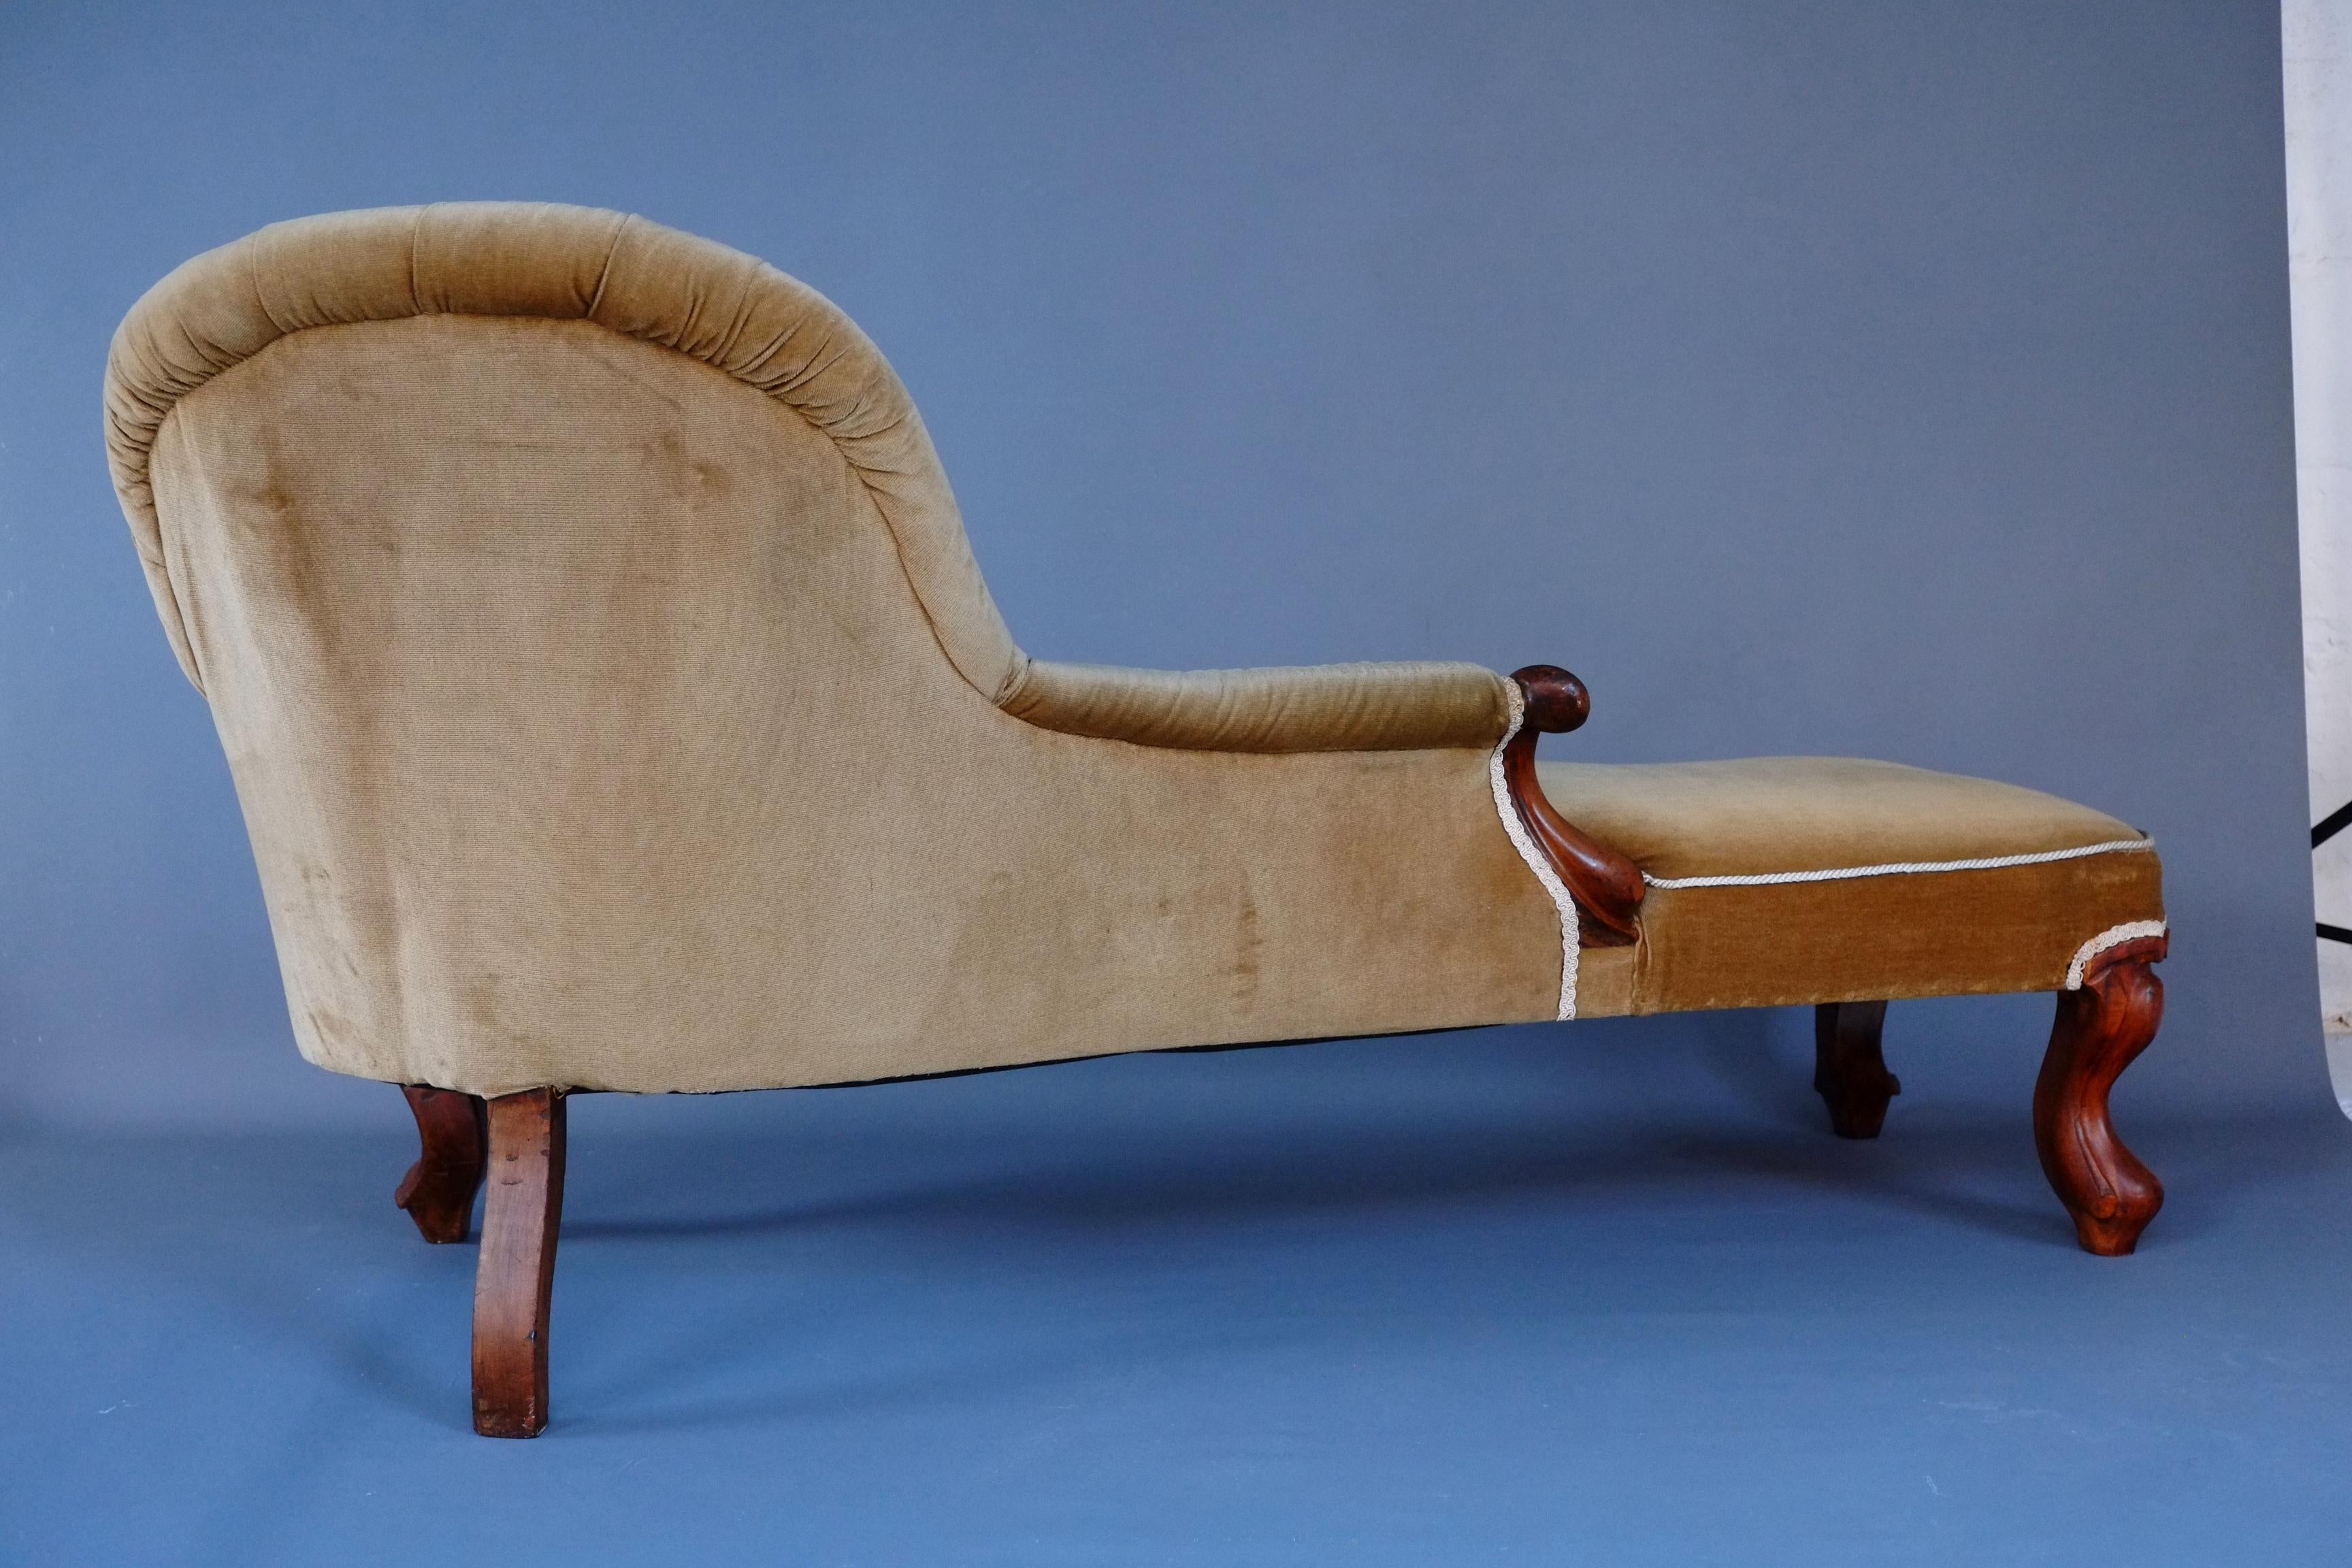 Antique French Chaise Longue Daybed in Walnut and Velvet 1